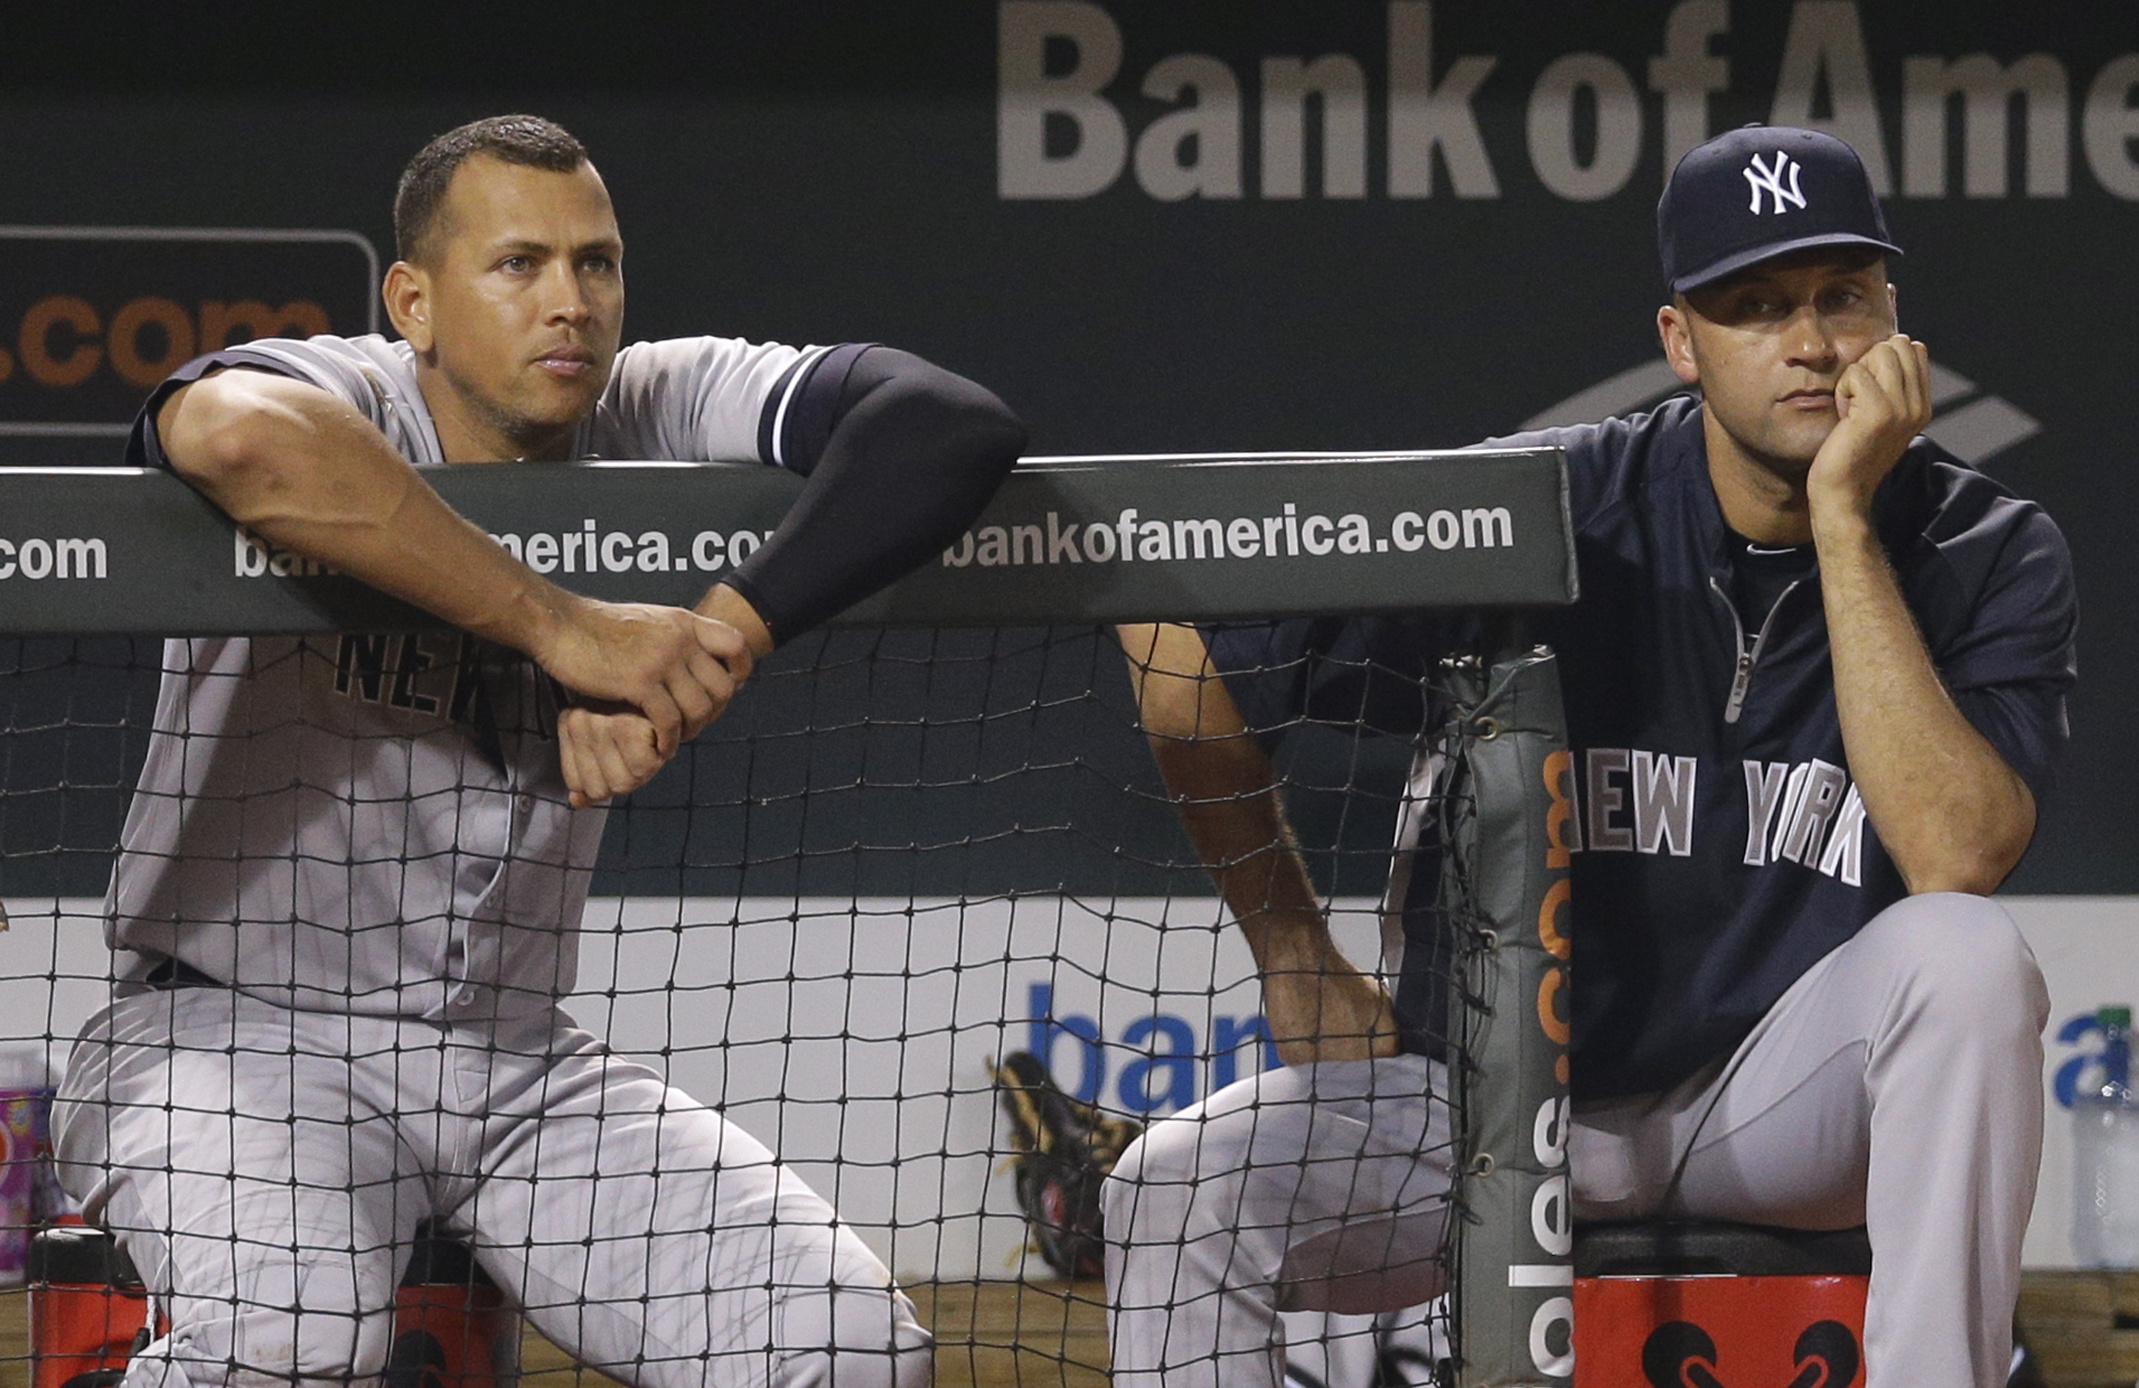 Derek Jeter Reveals Where He Stands With Alex Rodriguez Today